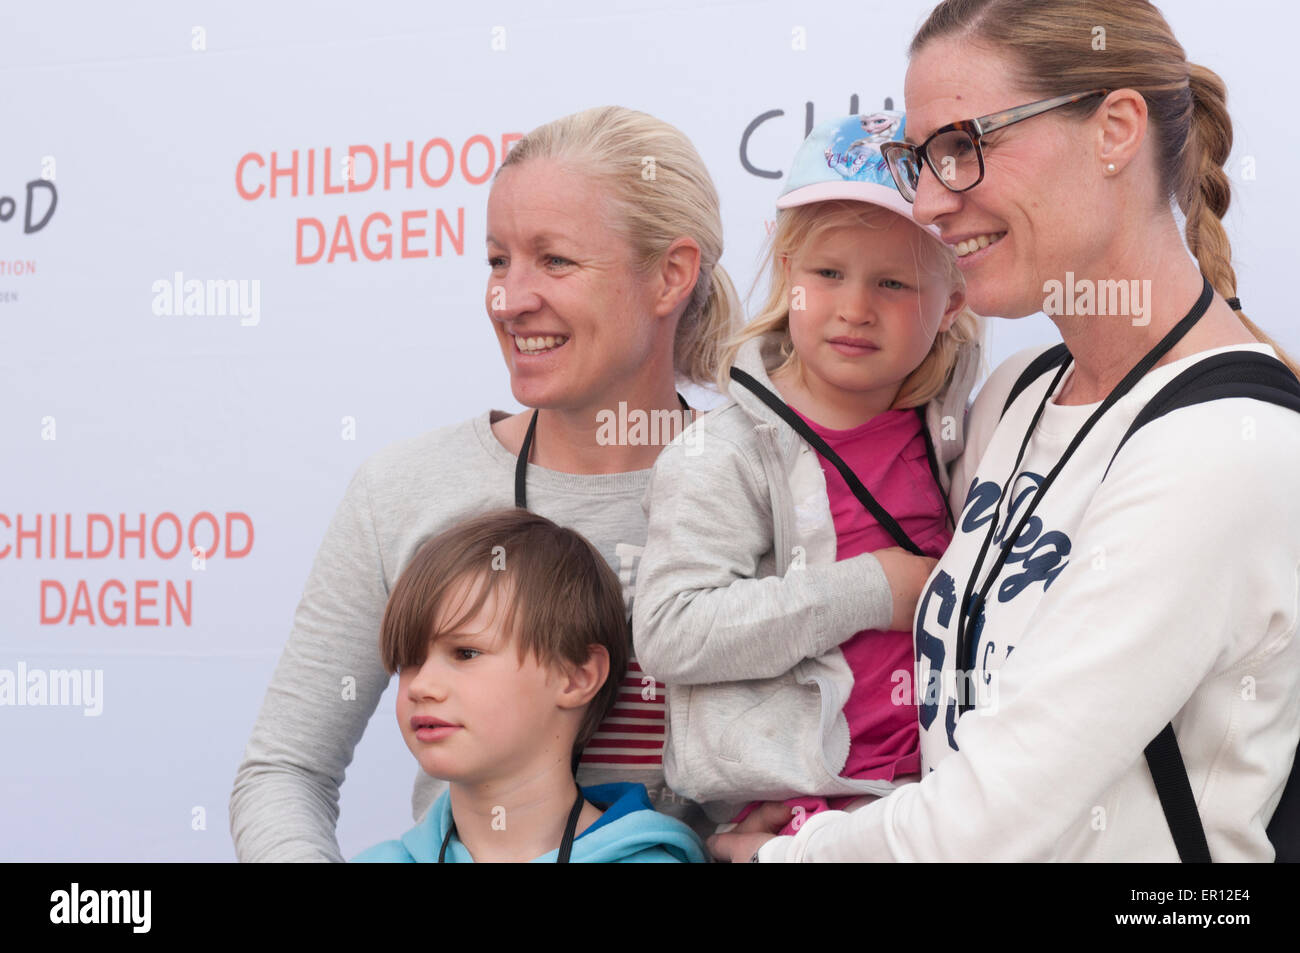 Stockholm, Sweden, 24th May, 2015. Childhood Day at the amusement park Gröna Lund. This is the twelfth year in a row that this special day is arranged at Gröna Lund. The aim is to raise money for the World Childhood Foundation's work to help vulnerable children. The Queen is the founder and Honorary Chair of the World Childhood Foundation. Football player Victoria Sandell Svensson. Credit:  Barbro Bergfeldt/Alamy Live News Stock Photo